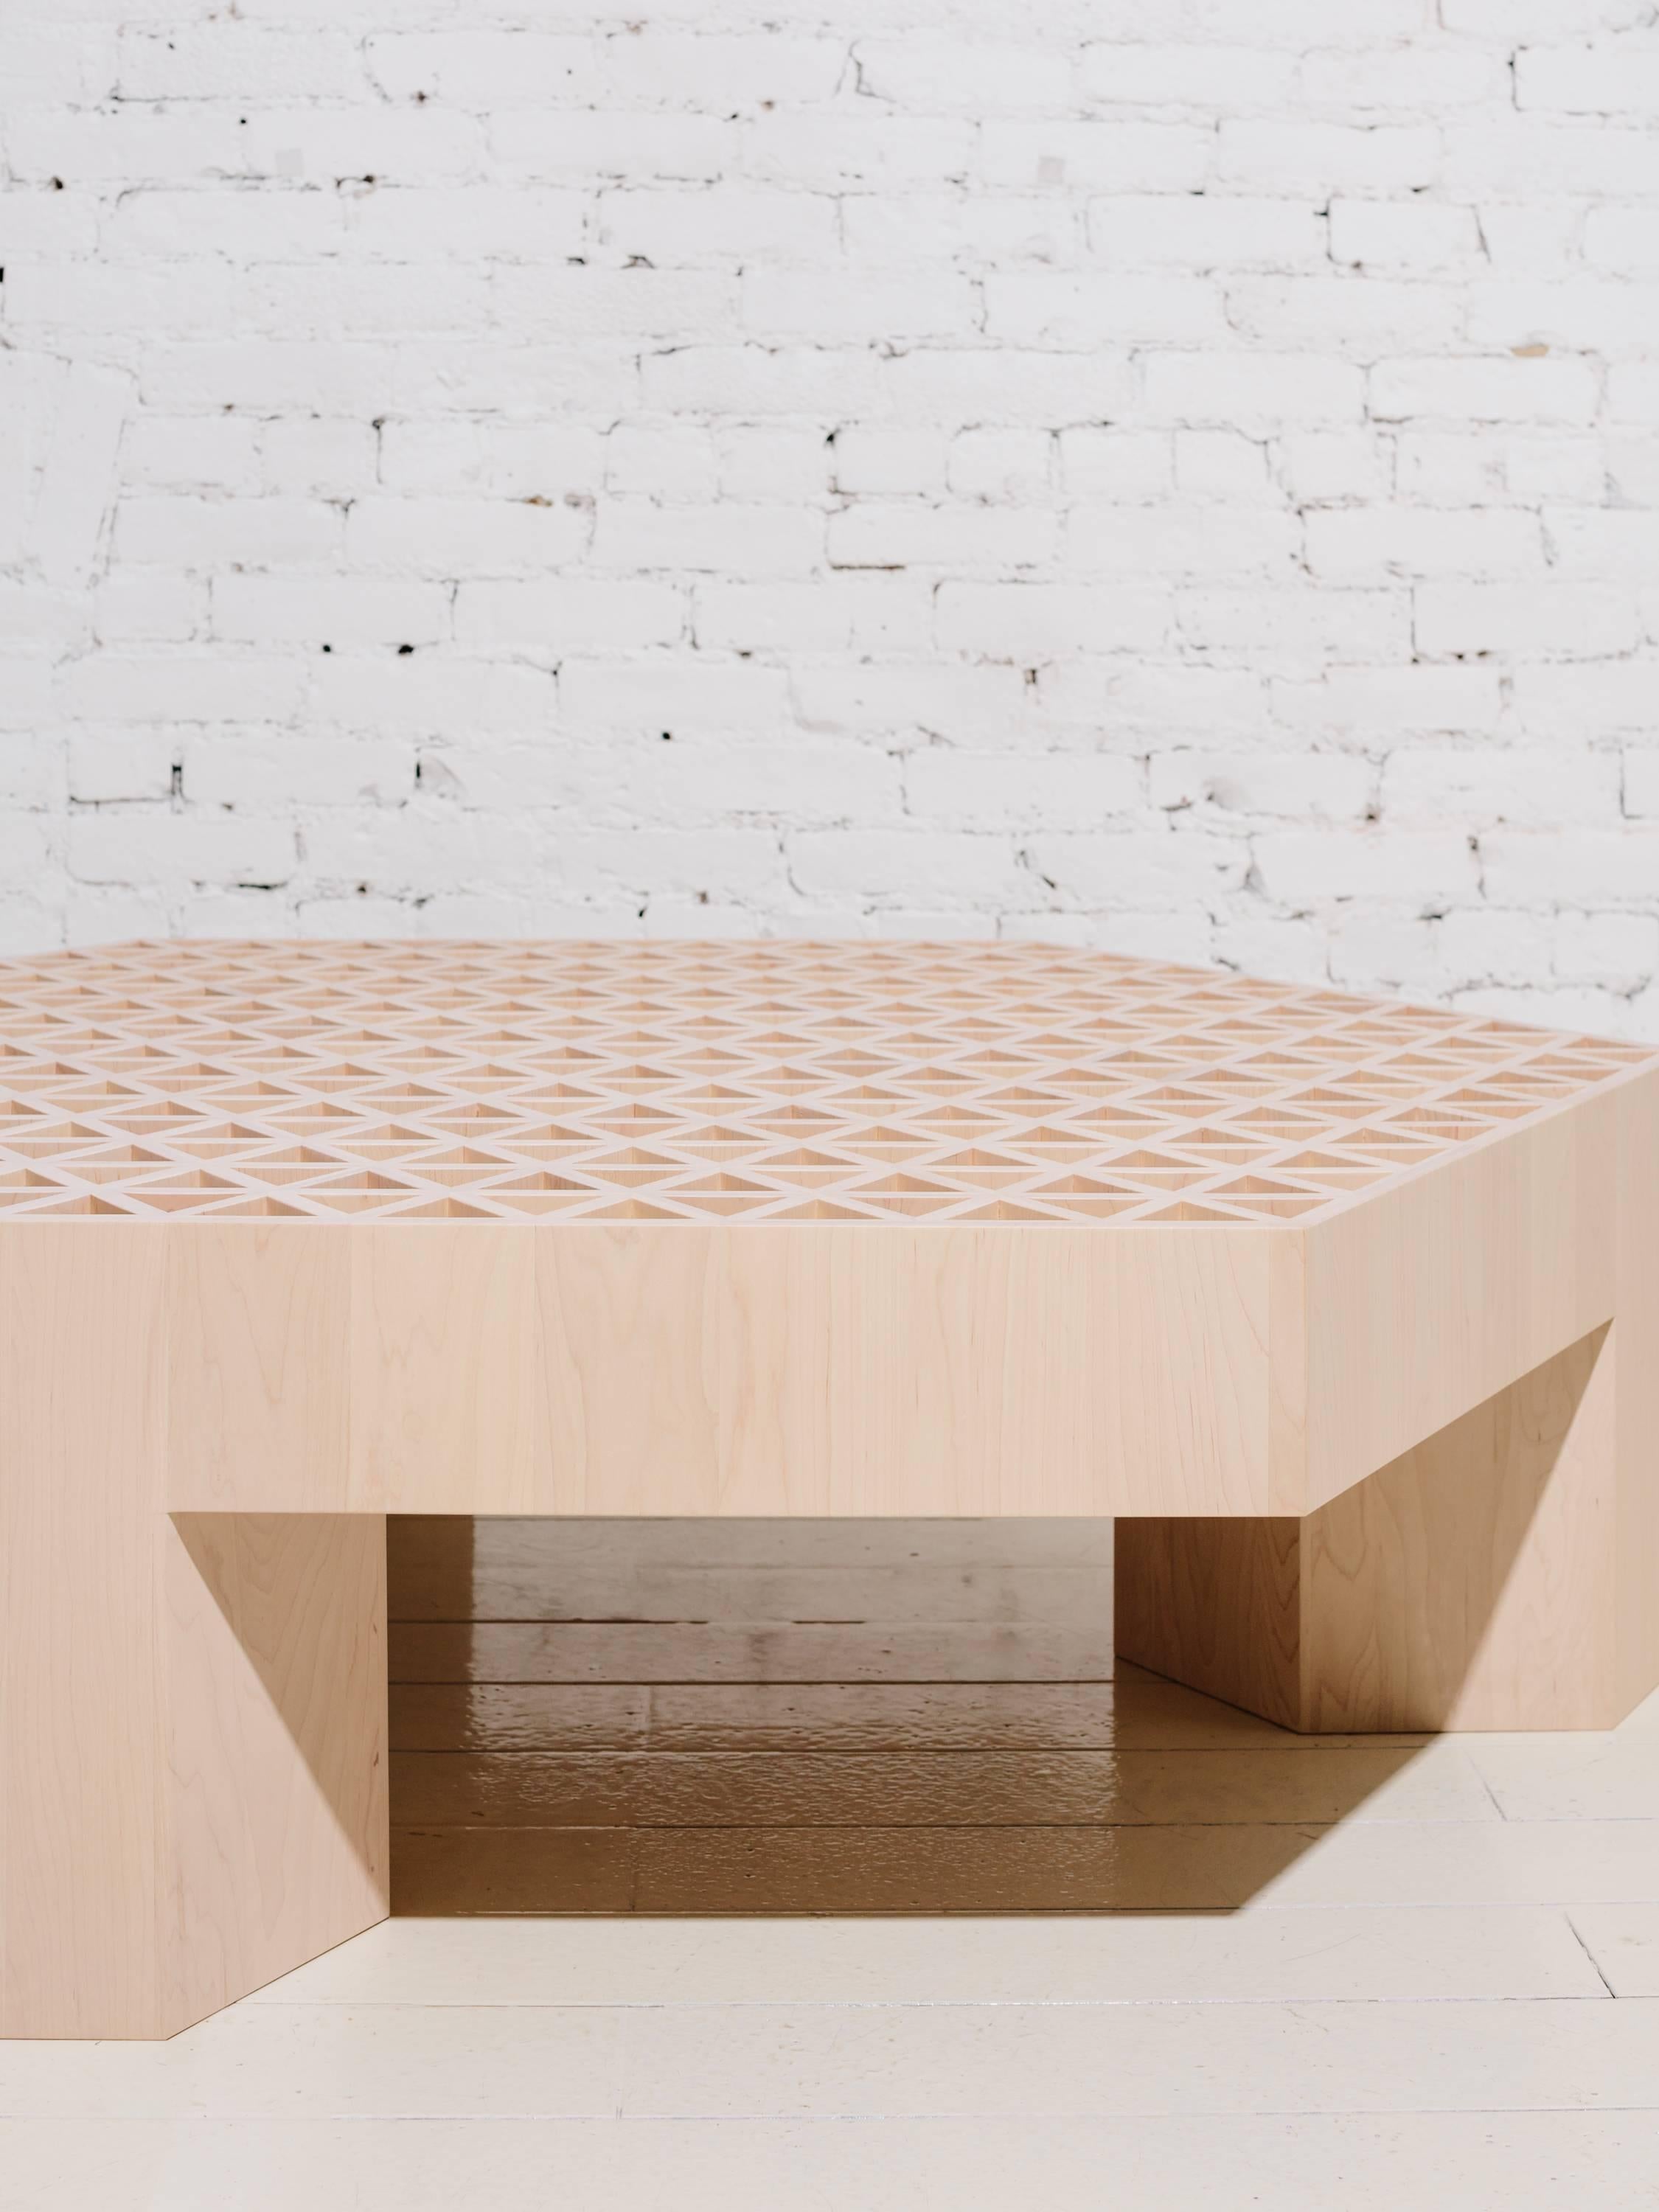 A part of Fort Standard’s “Qualities of Material” collection, the Assemblage coffee table is made from hundreds of thin, hard maple slats. The slats are assembled into the vertically oriented triangular tubes that make up the surface and extruded